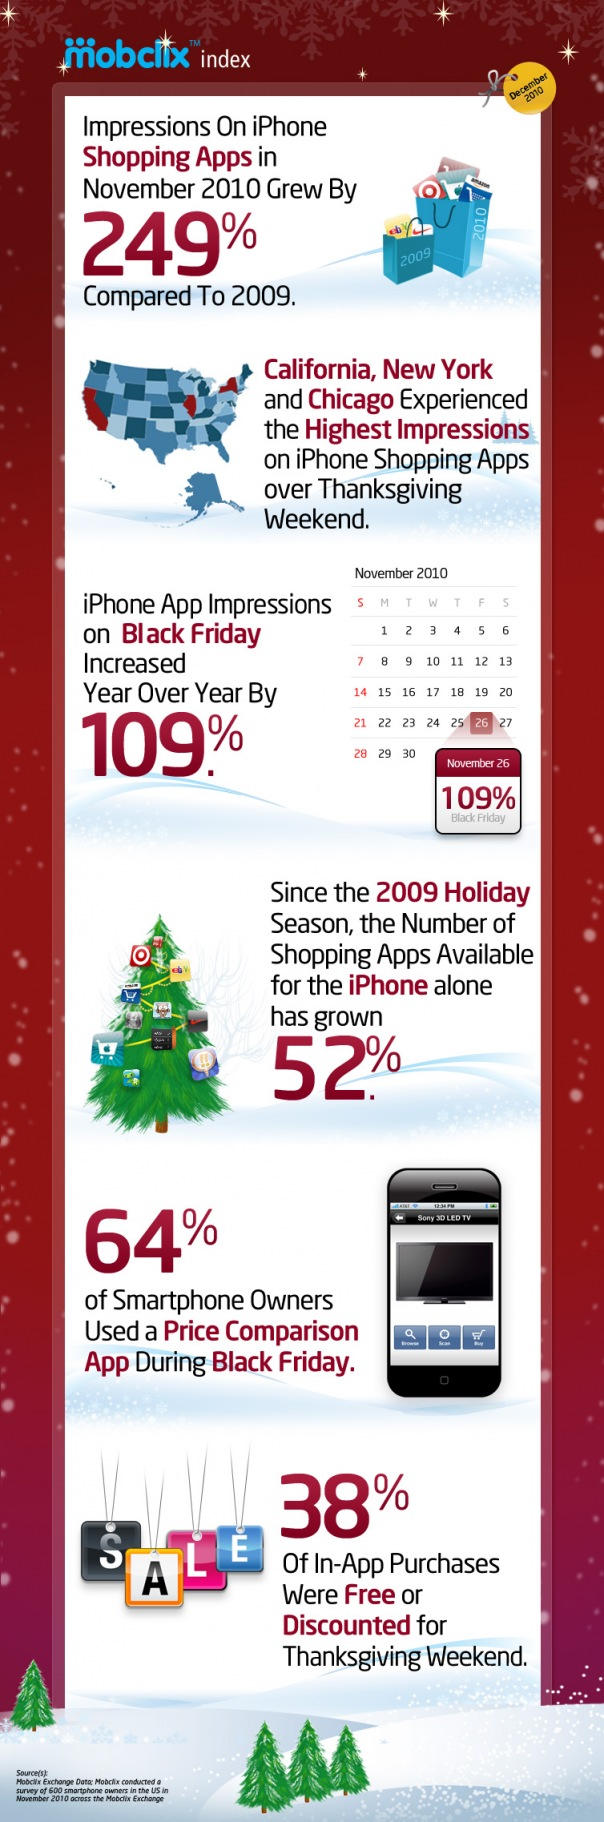 mobclix-holiday-infographic_dec-2010